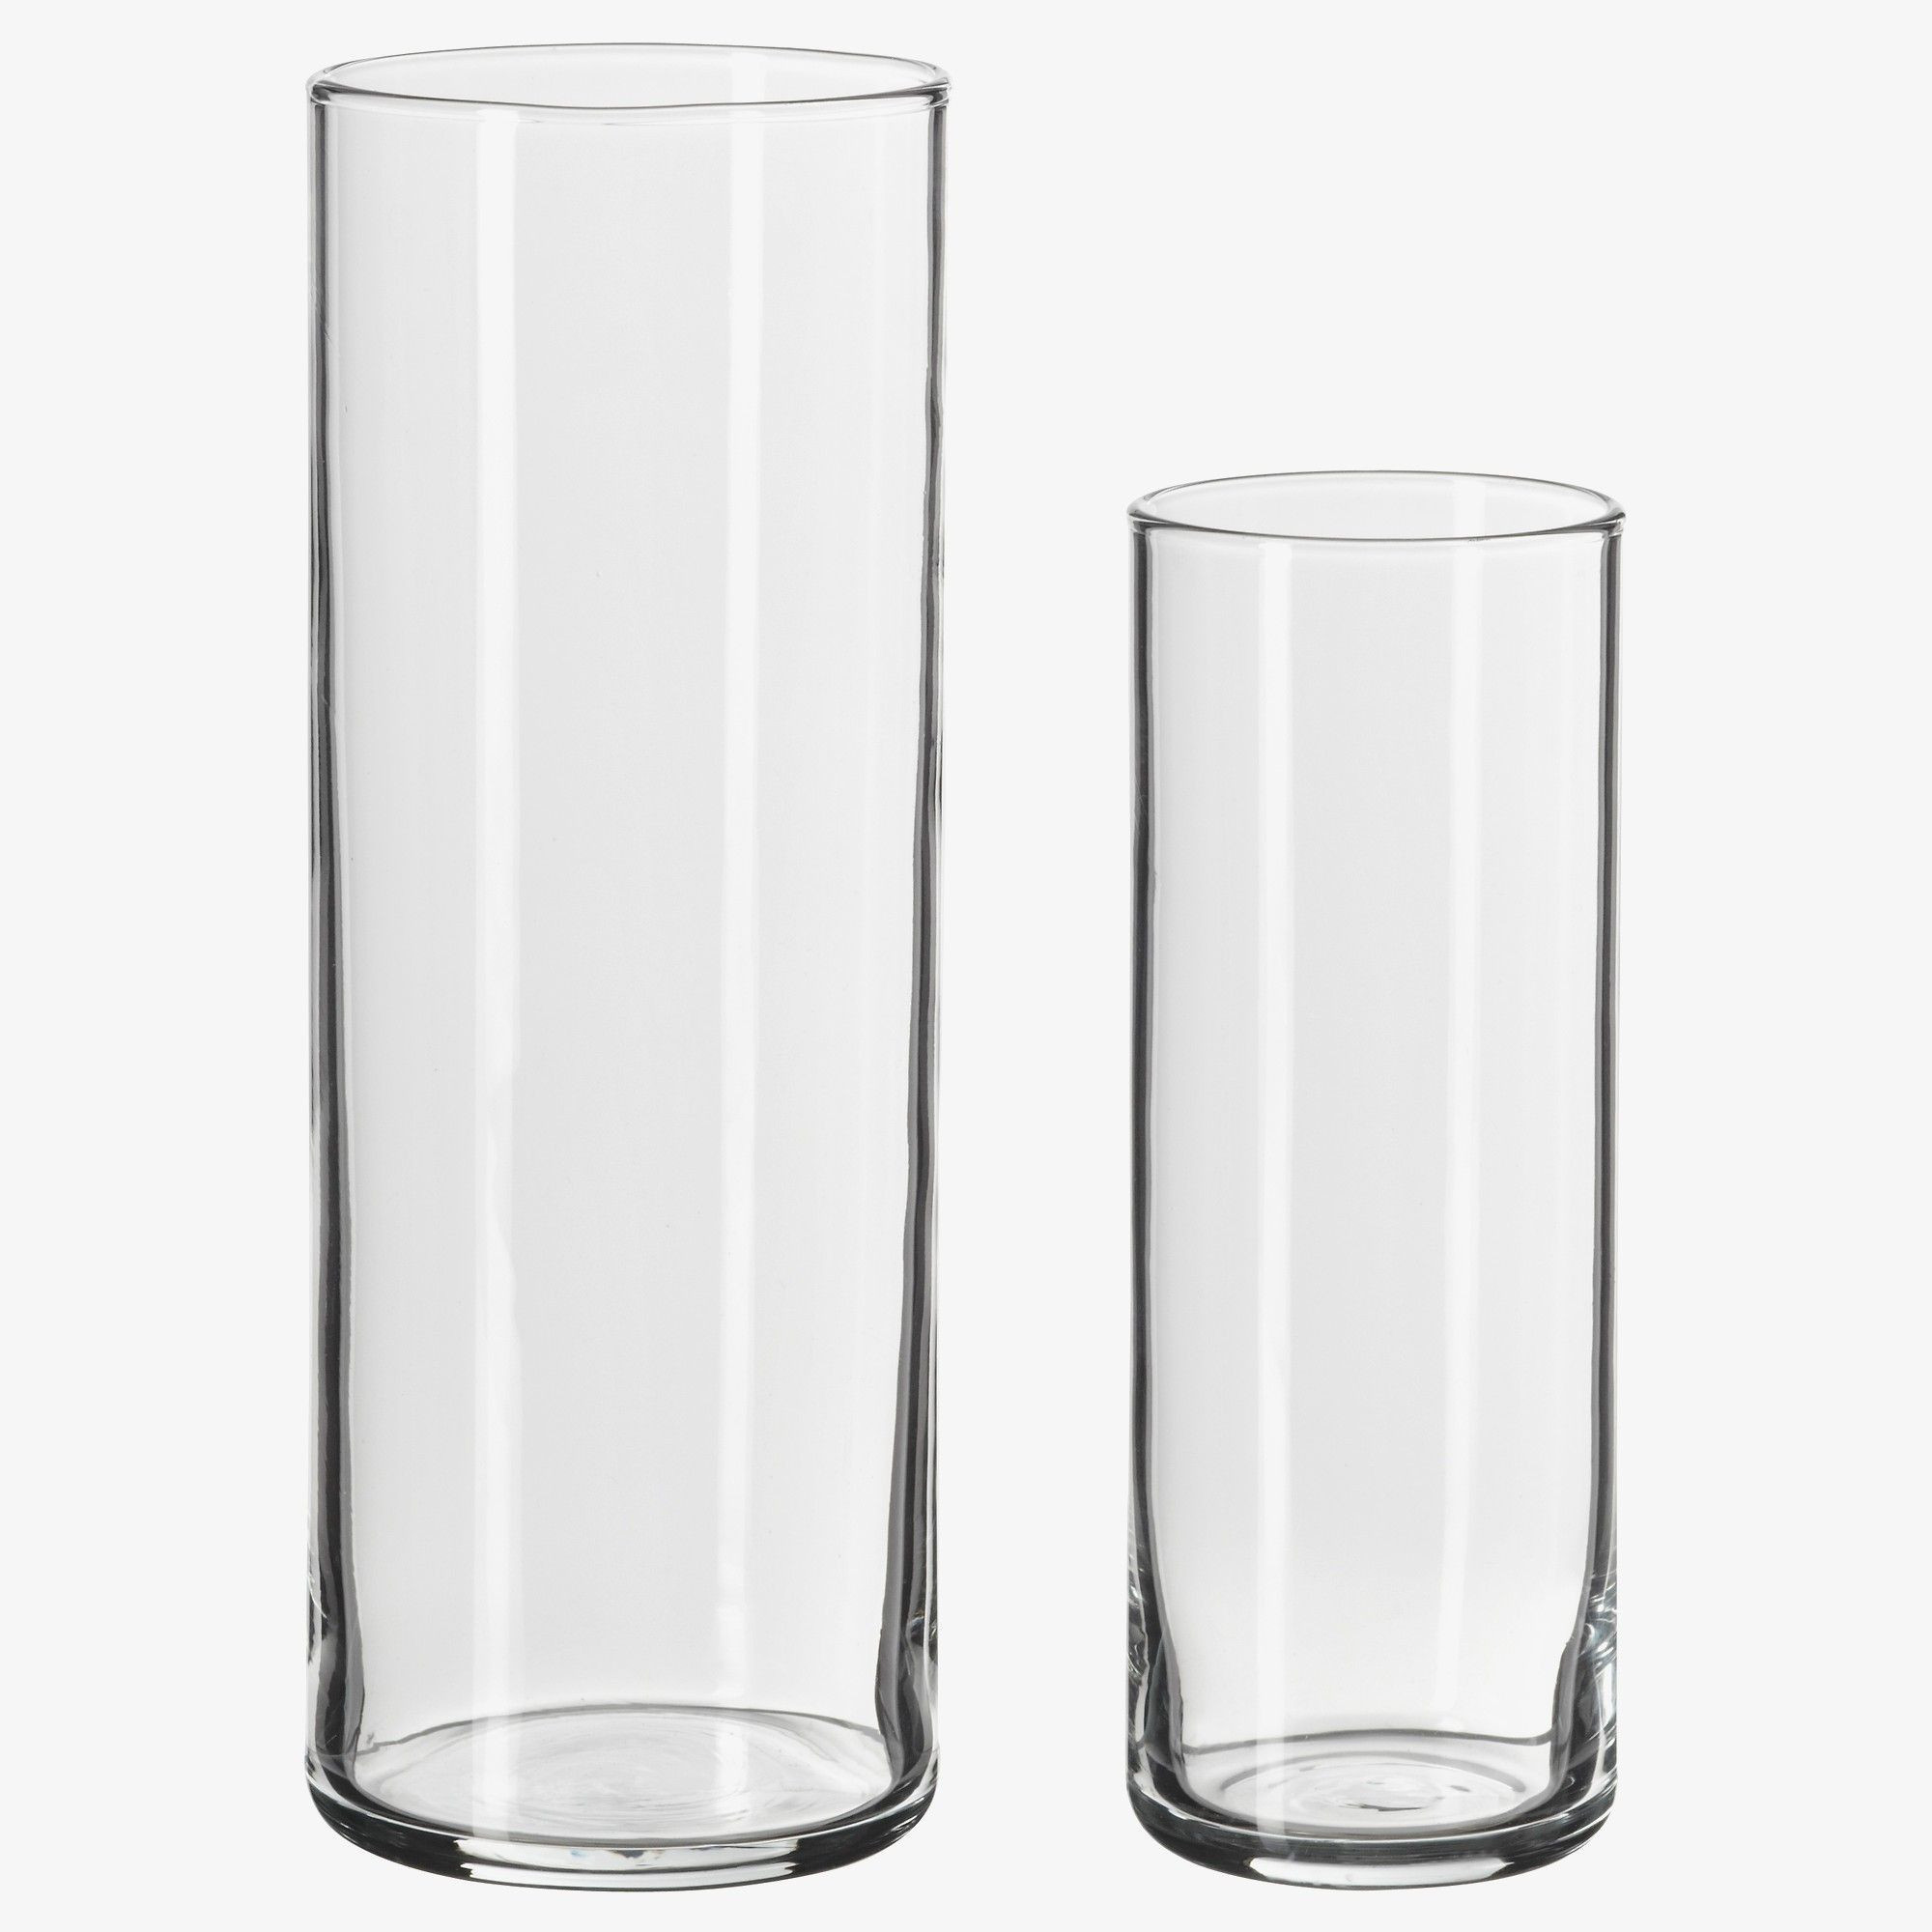 18 Popular Clear Plastic Cylinder Vases Bulk 2024 free download clear plastic cylinder vases bulk of 40 glass vases bulk the weekly world with regard to clear glass tv stand charming new design ikea mantel great pe s5h